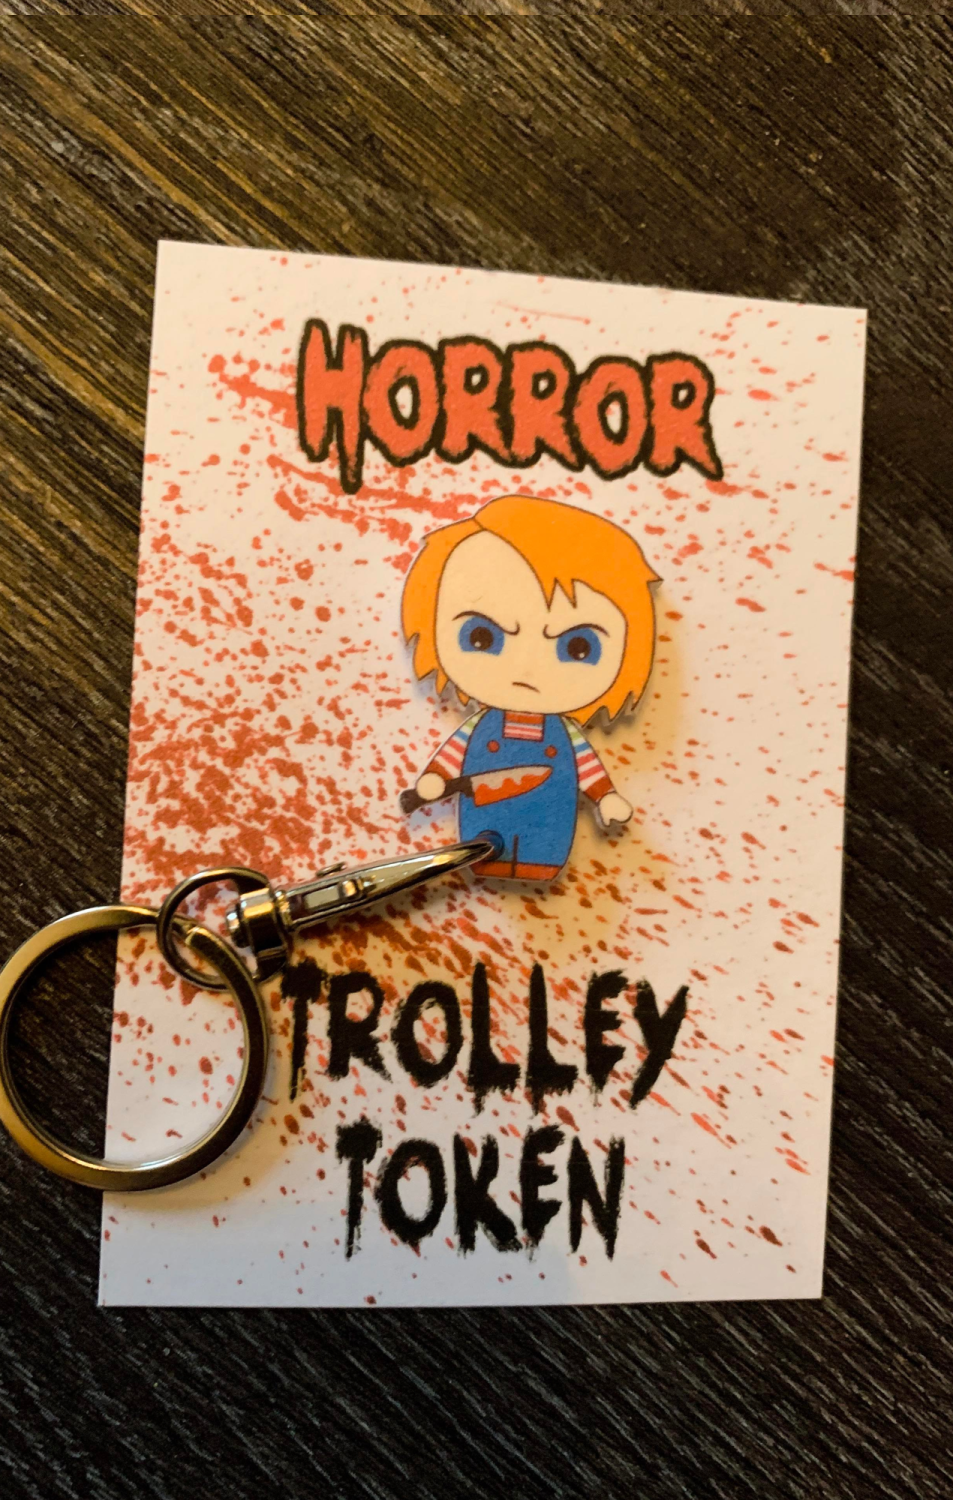 Chucky Trolley Token - Childs Play